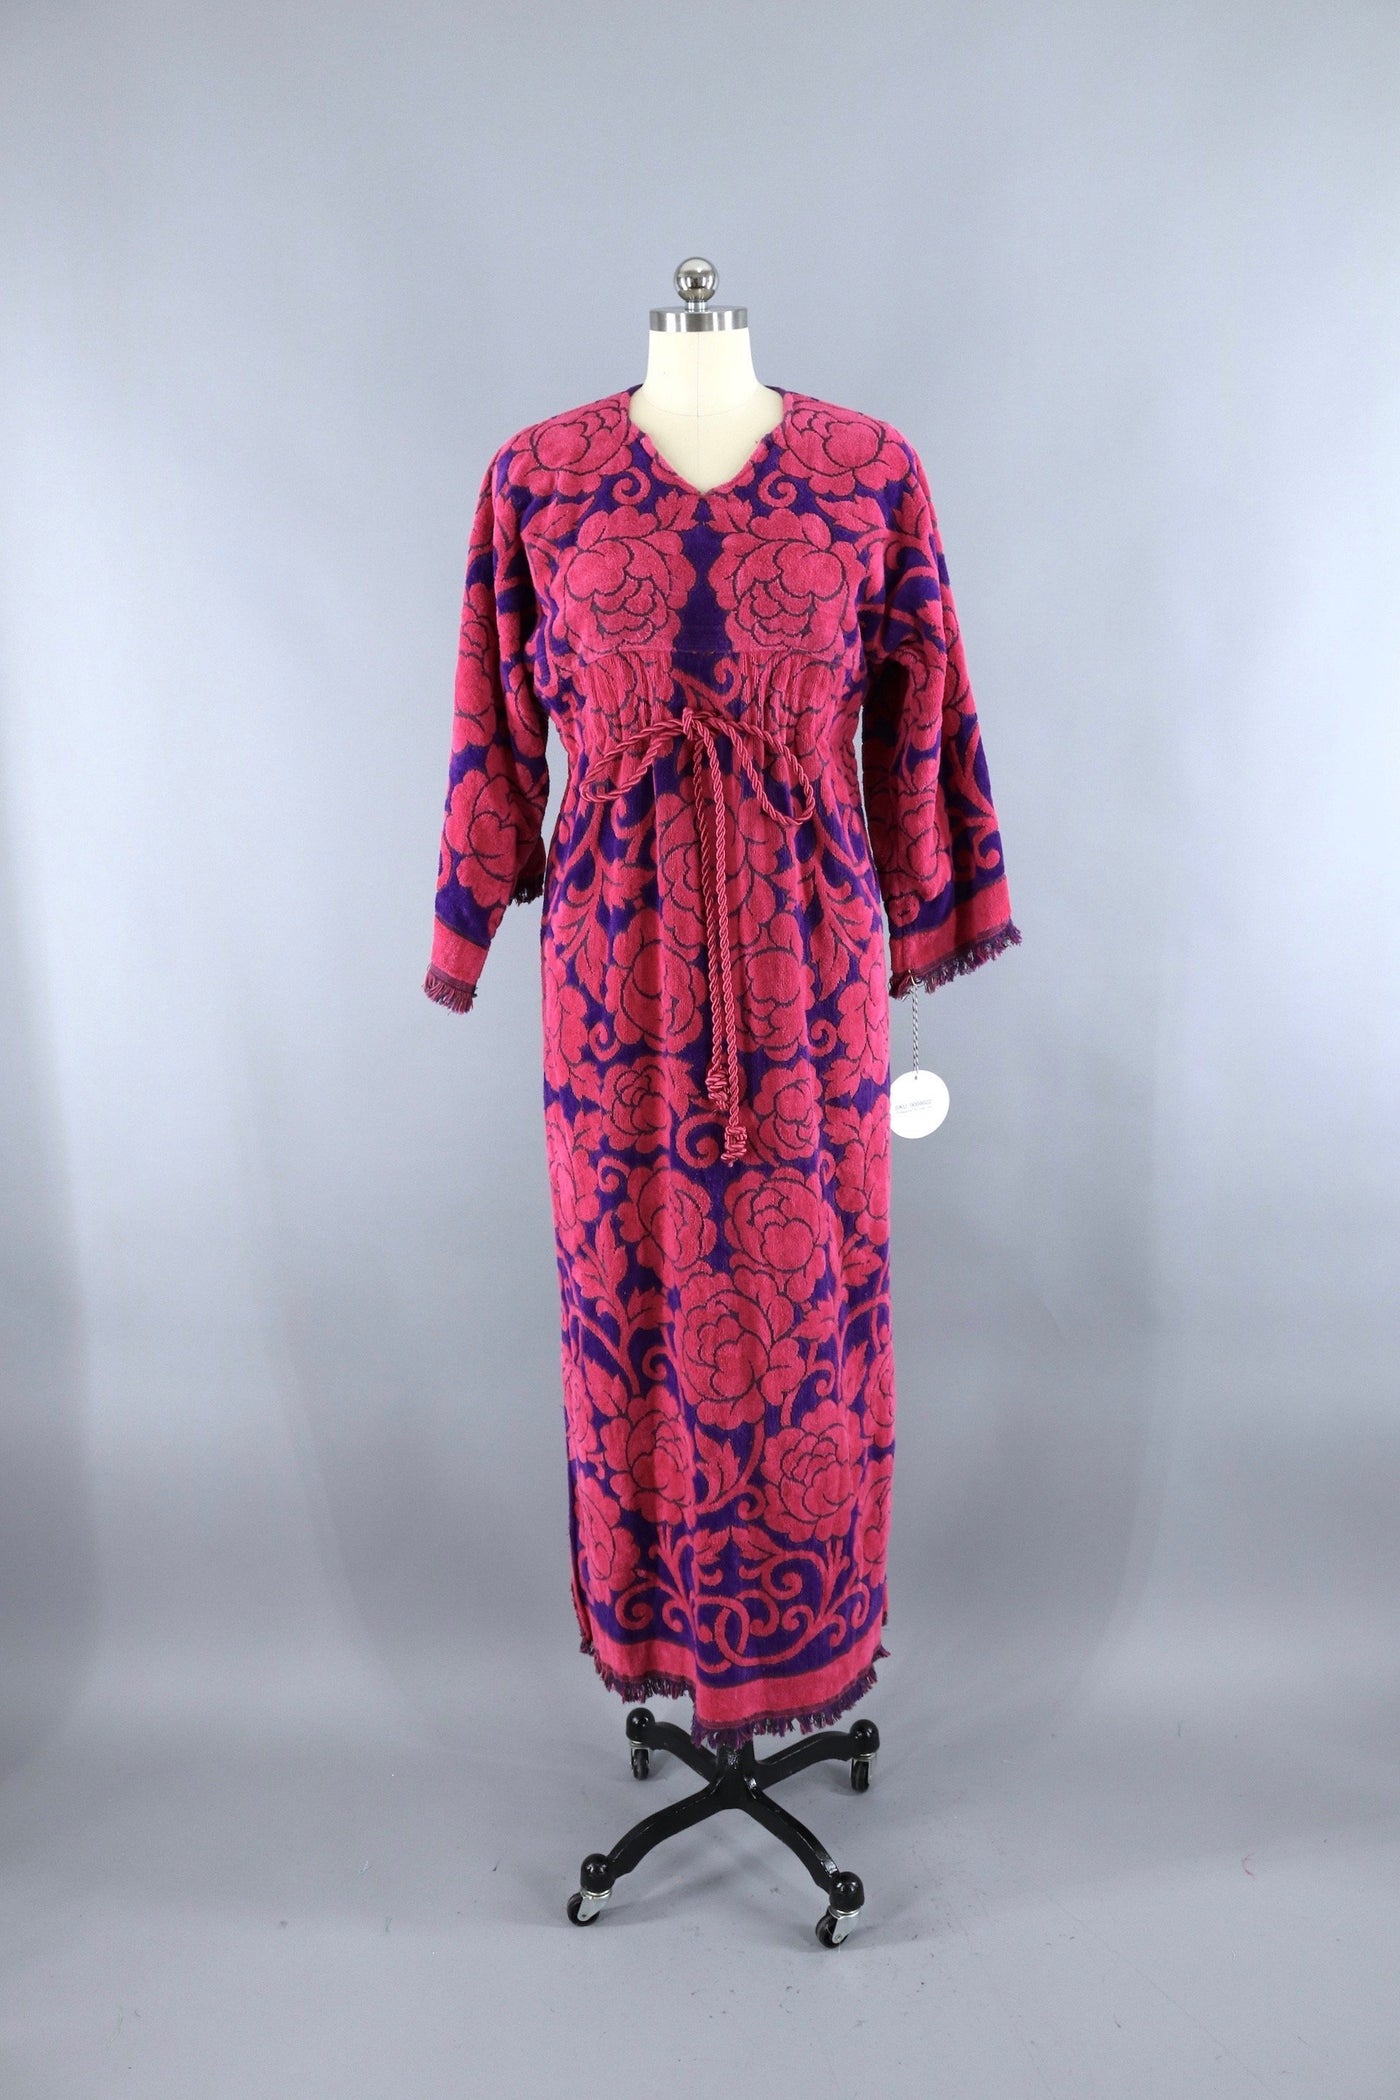 1960s Vintage Terry Cloth Towel Dress / Pink & Purple Roses - ThisBlueBird